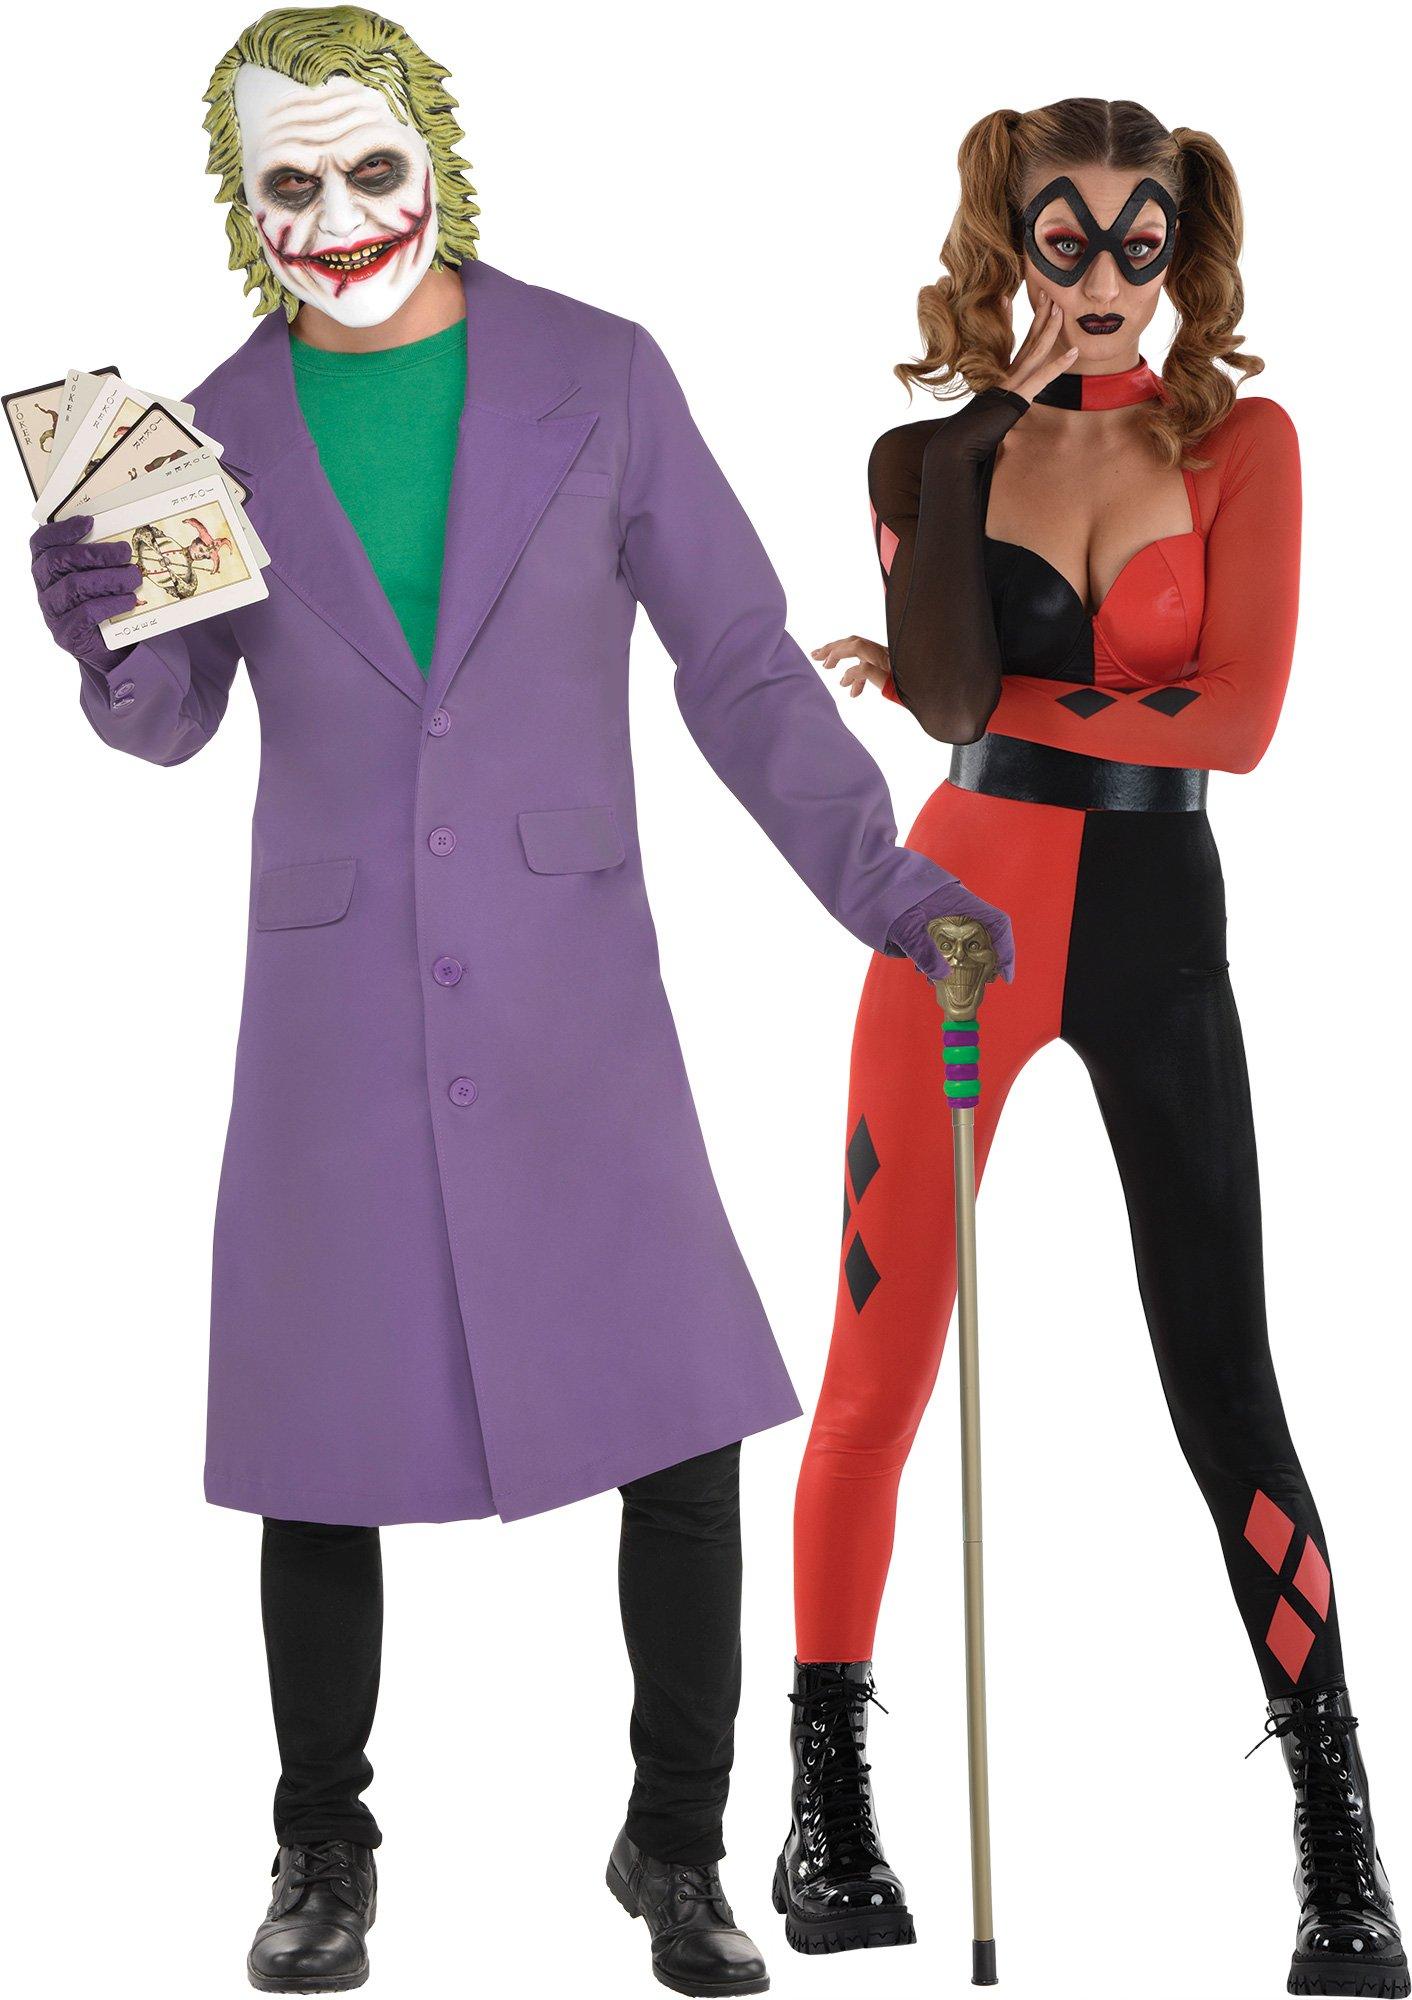 The Joker Justice League / Suicide Squad DC Comics Cardboard Cutout /  Standee/ Stand Up buy Superhero cutouts at